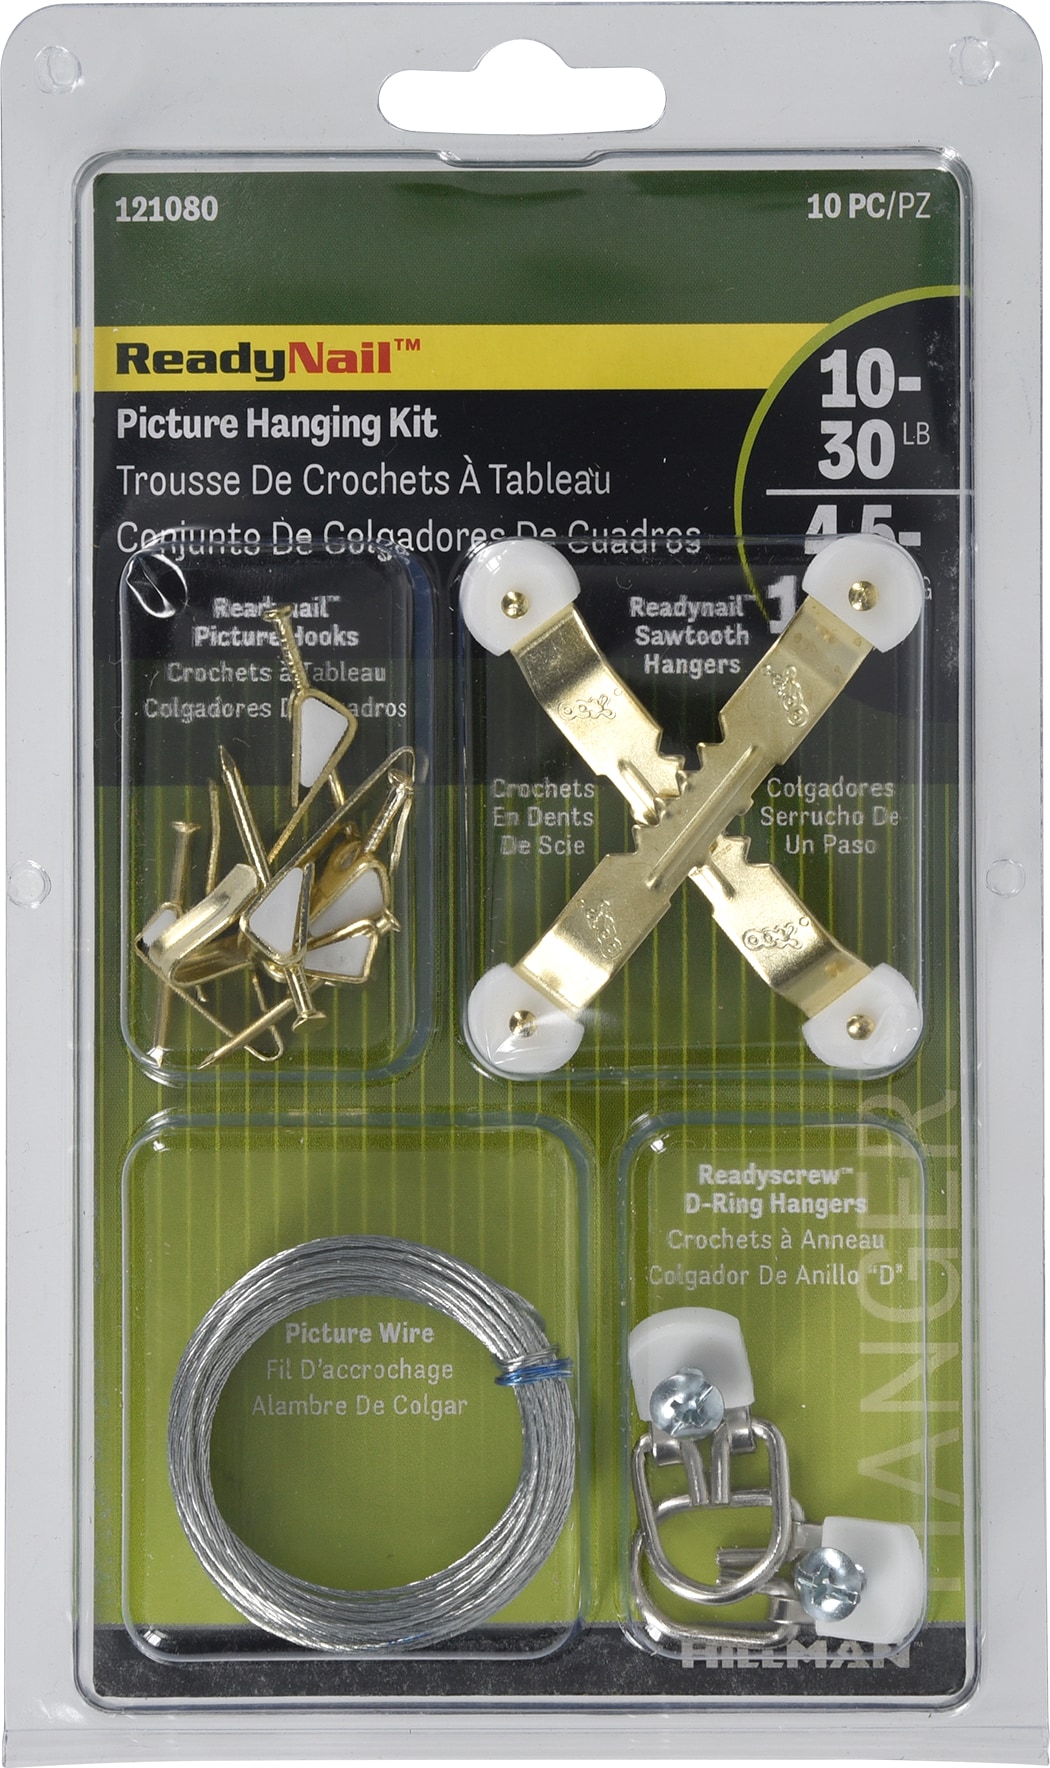 Hillman Readynail Picture Hanging Kit